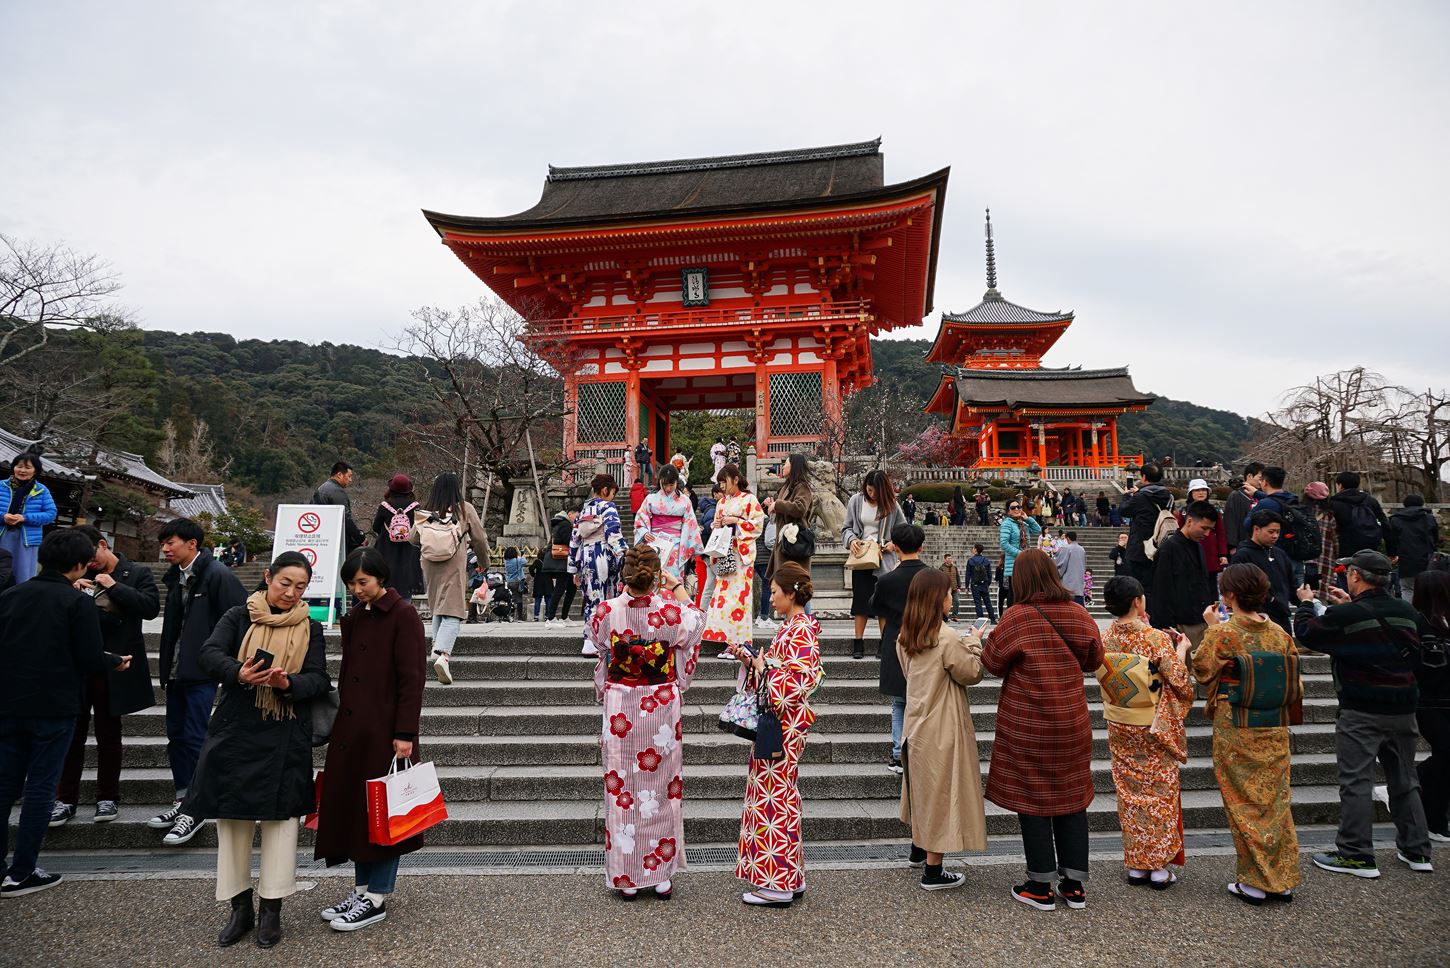 Sightseeing scenery that simply shows the weather in Kyoto in February4